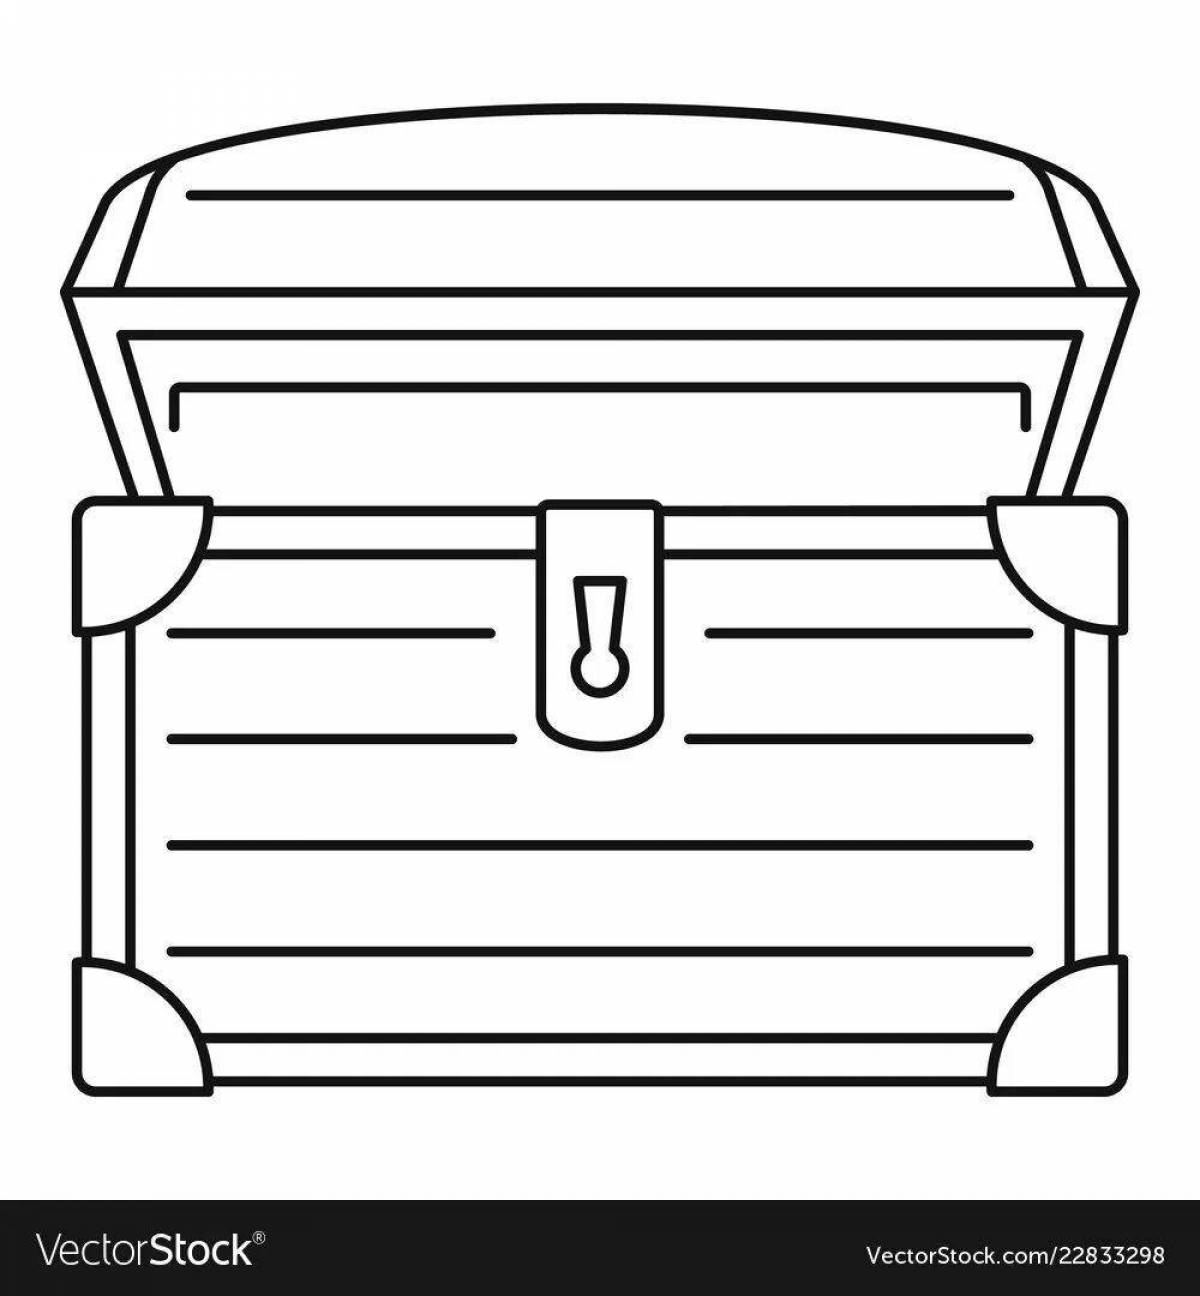 Sweet chest coloring page for kids